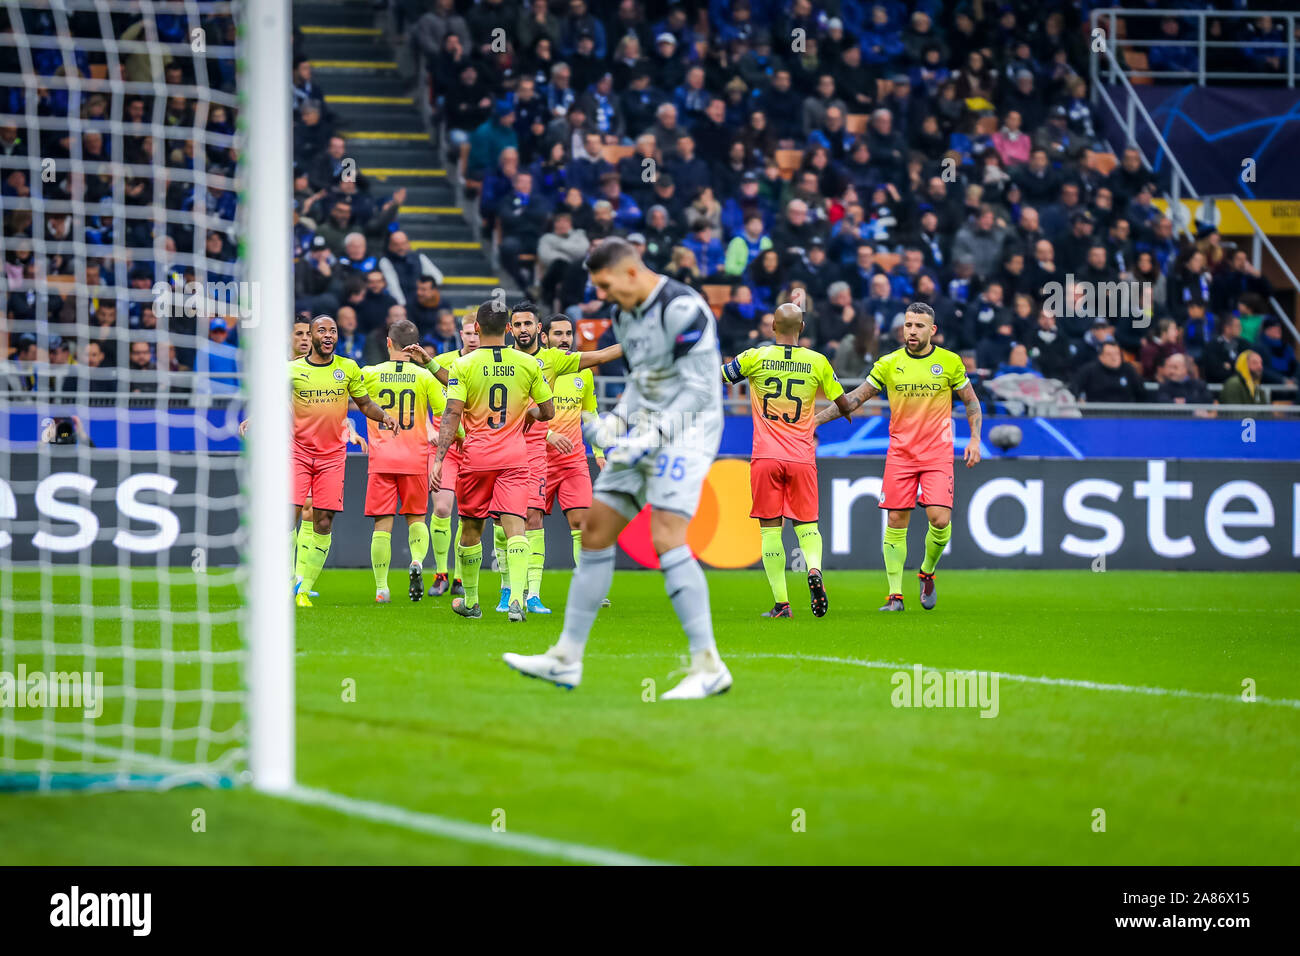 Milan, Italy, 06 Nov 2019, goal raheem sterling (manchester city) during Tournament round, group C, Atalanta vs Manchester City - Soccer Champions League Men Championship - Credit: LPS/Fabrizio Carabelli/Alamy Live News Stock Photo